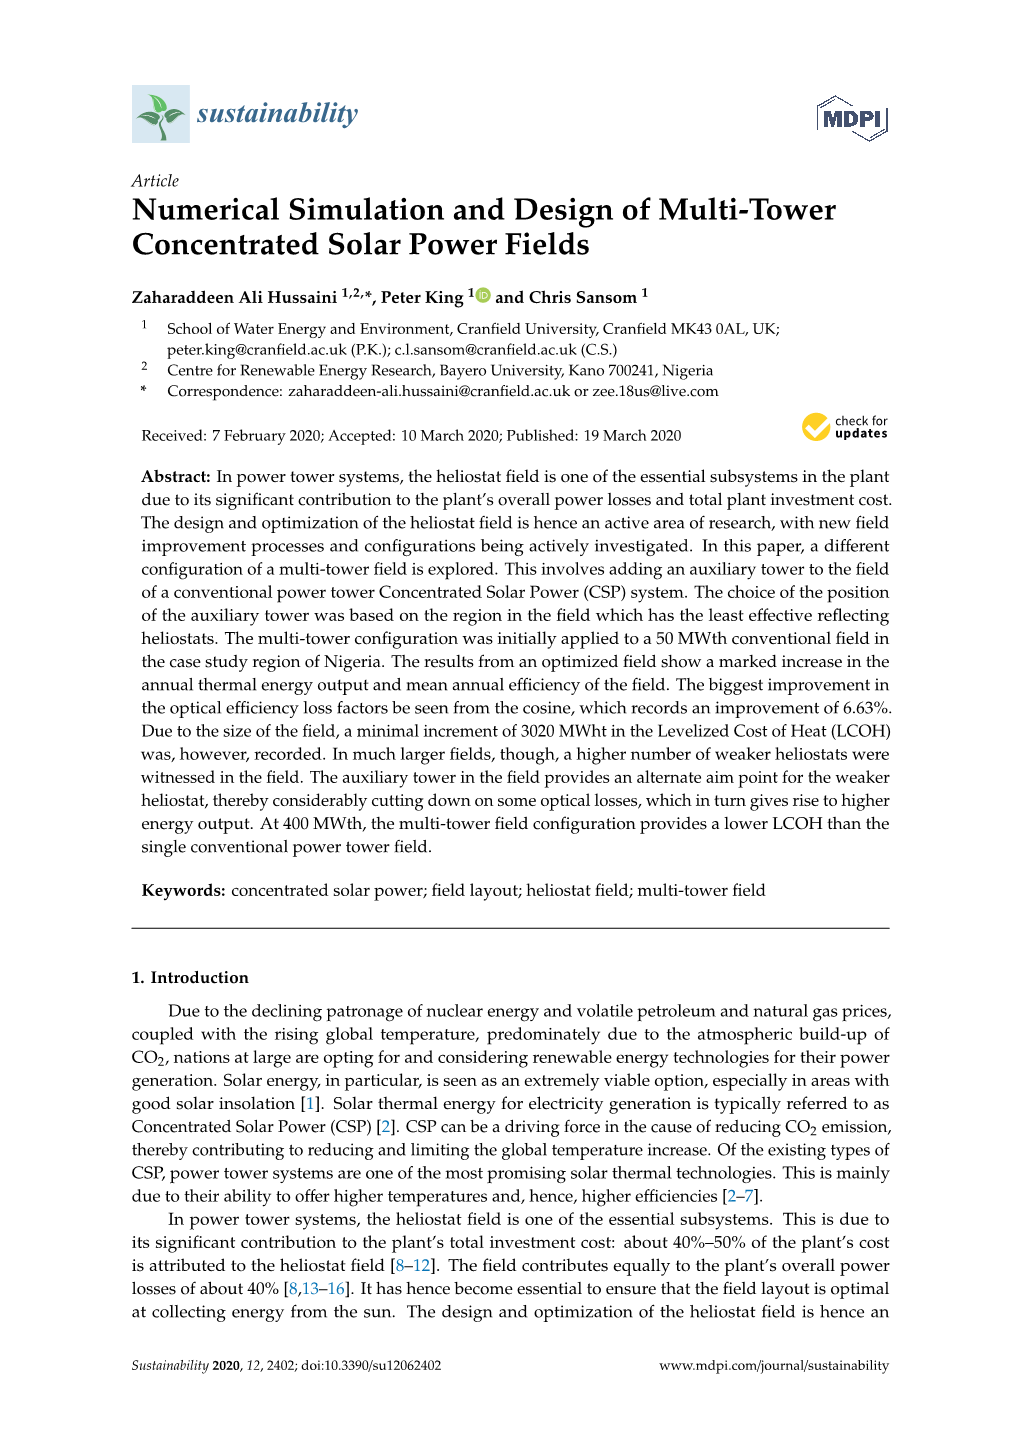 Numerical Simulation and Design of Multi-Tower Concentrated Solar Power Fields